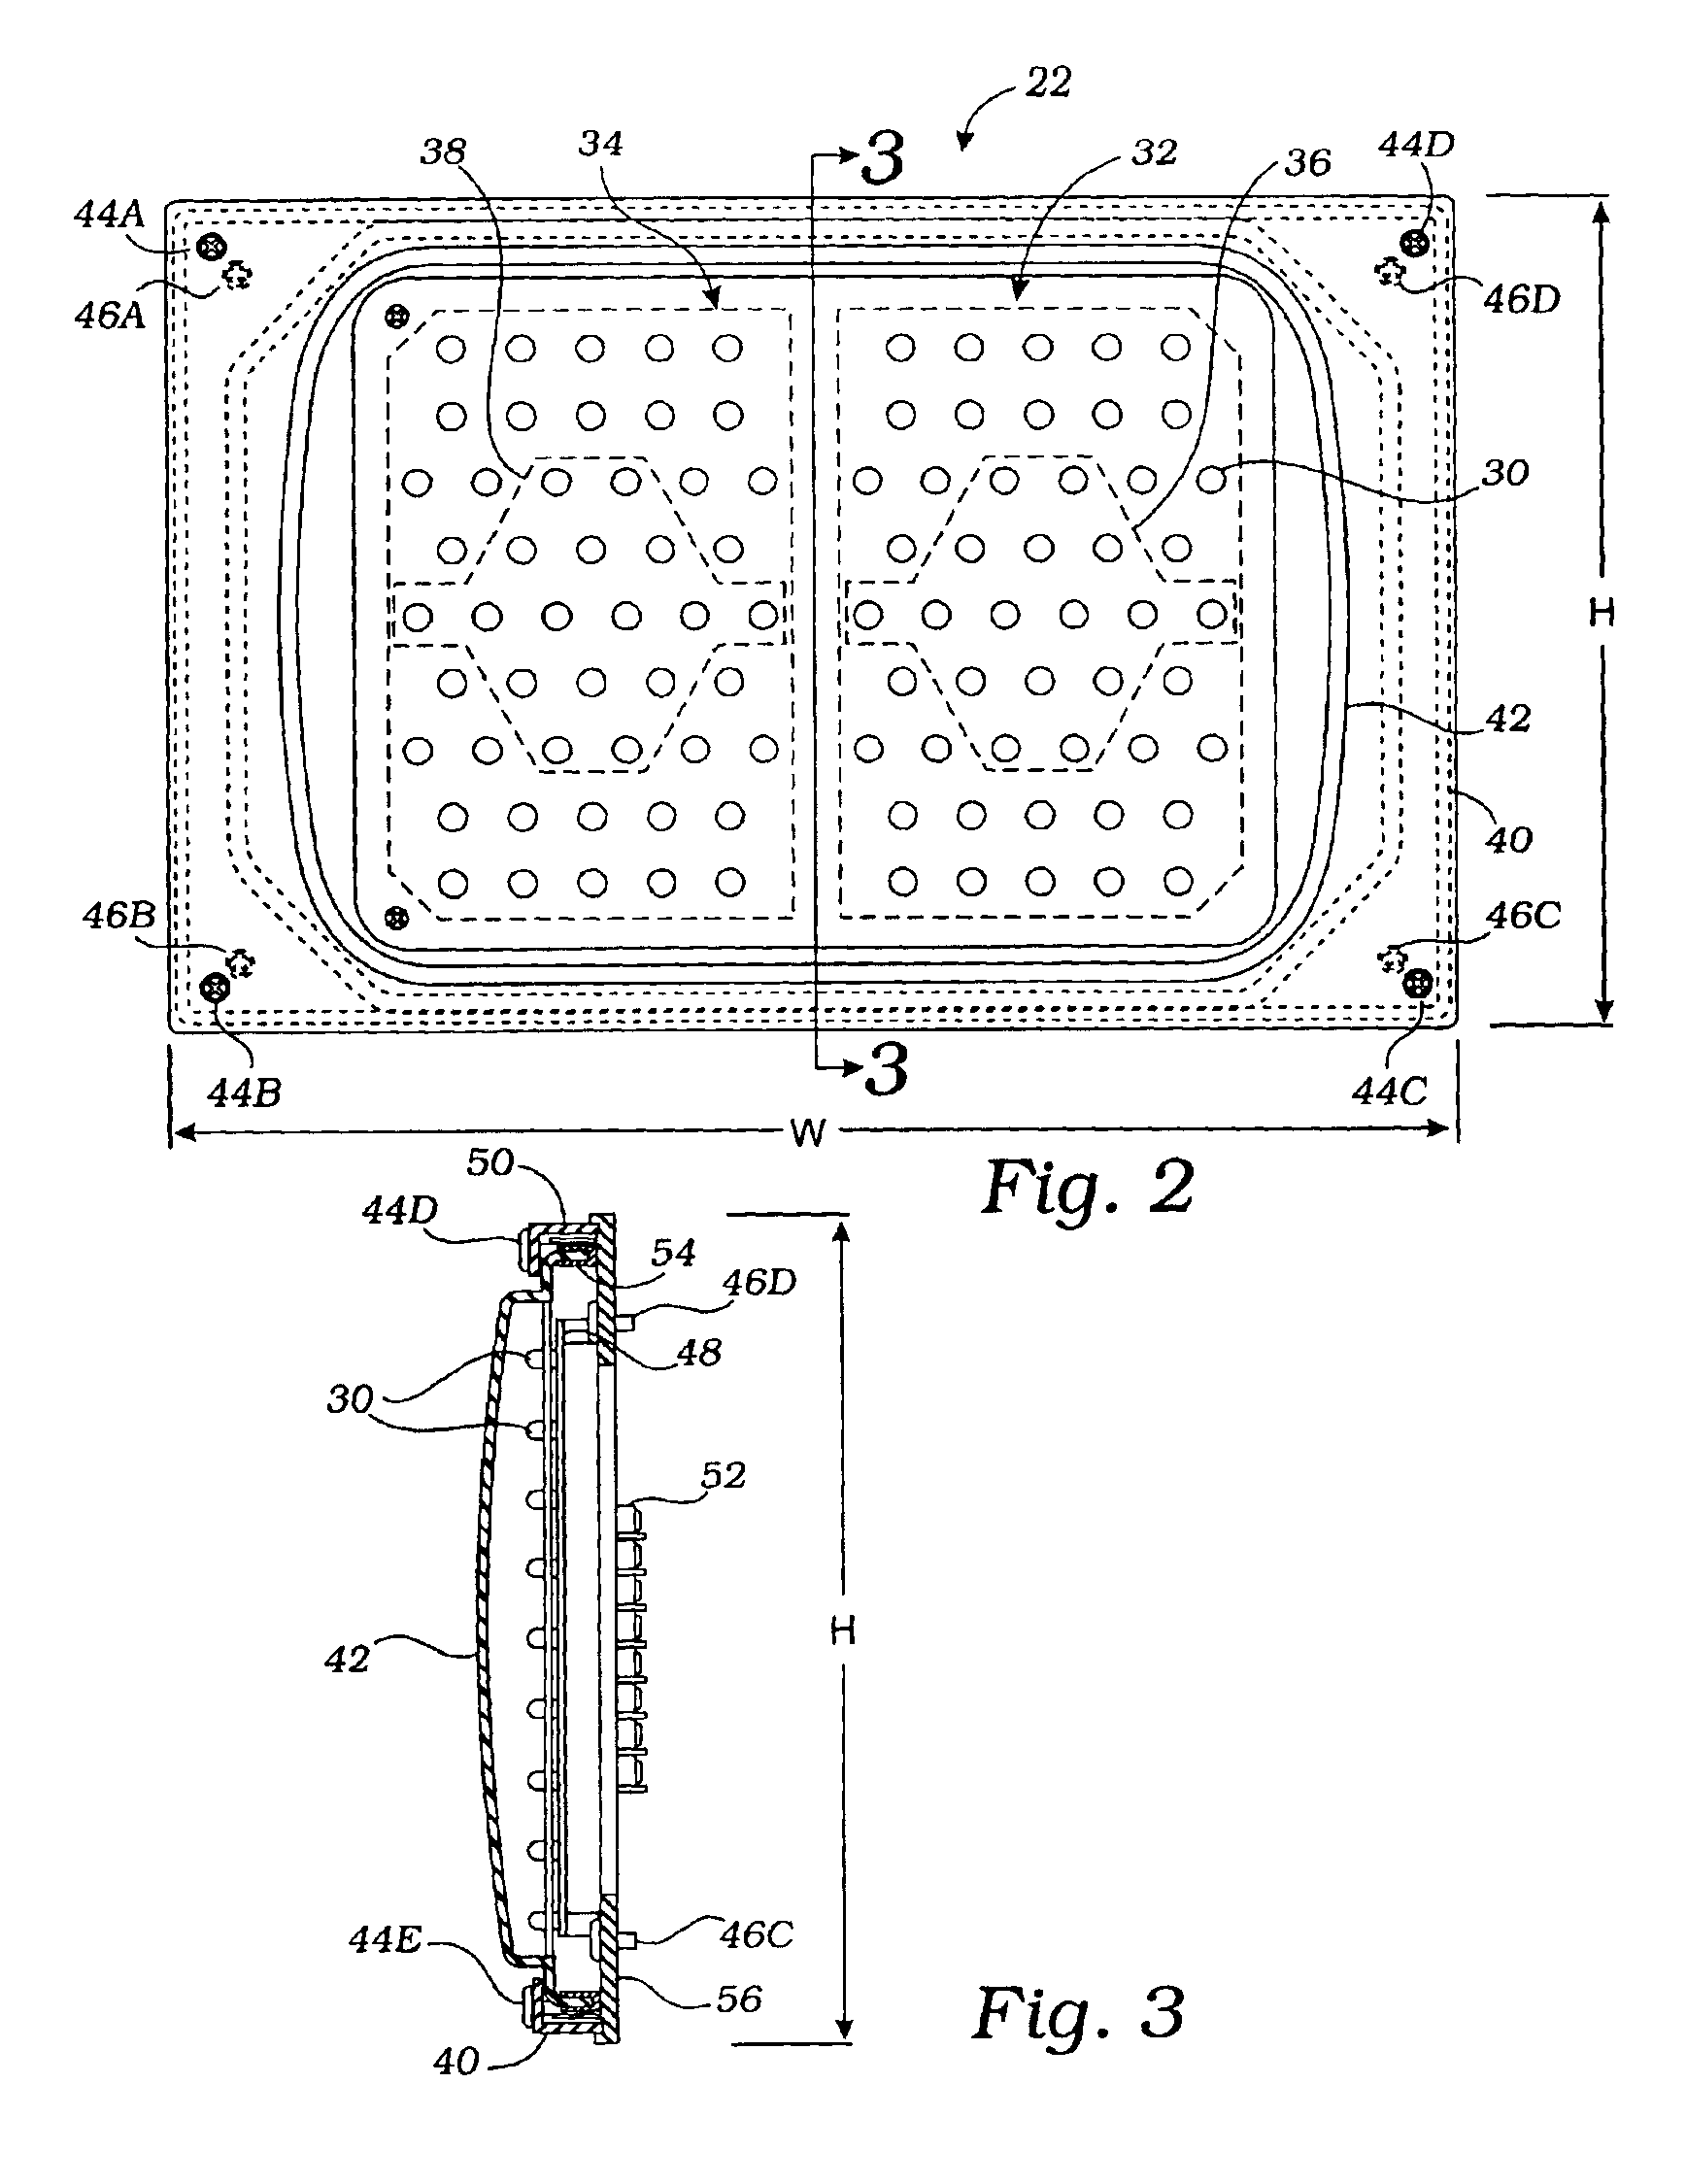 Vehicle signal light fixture performing multiple signaling functions using an array of LEDs